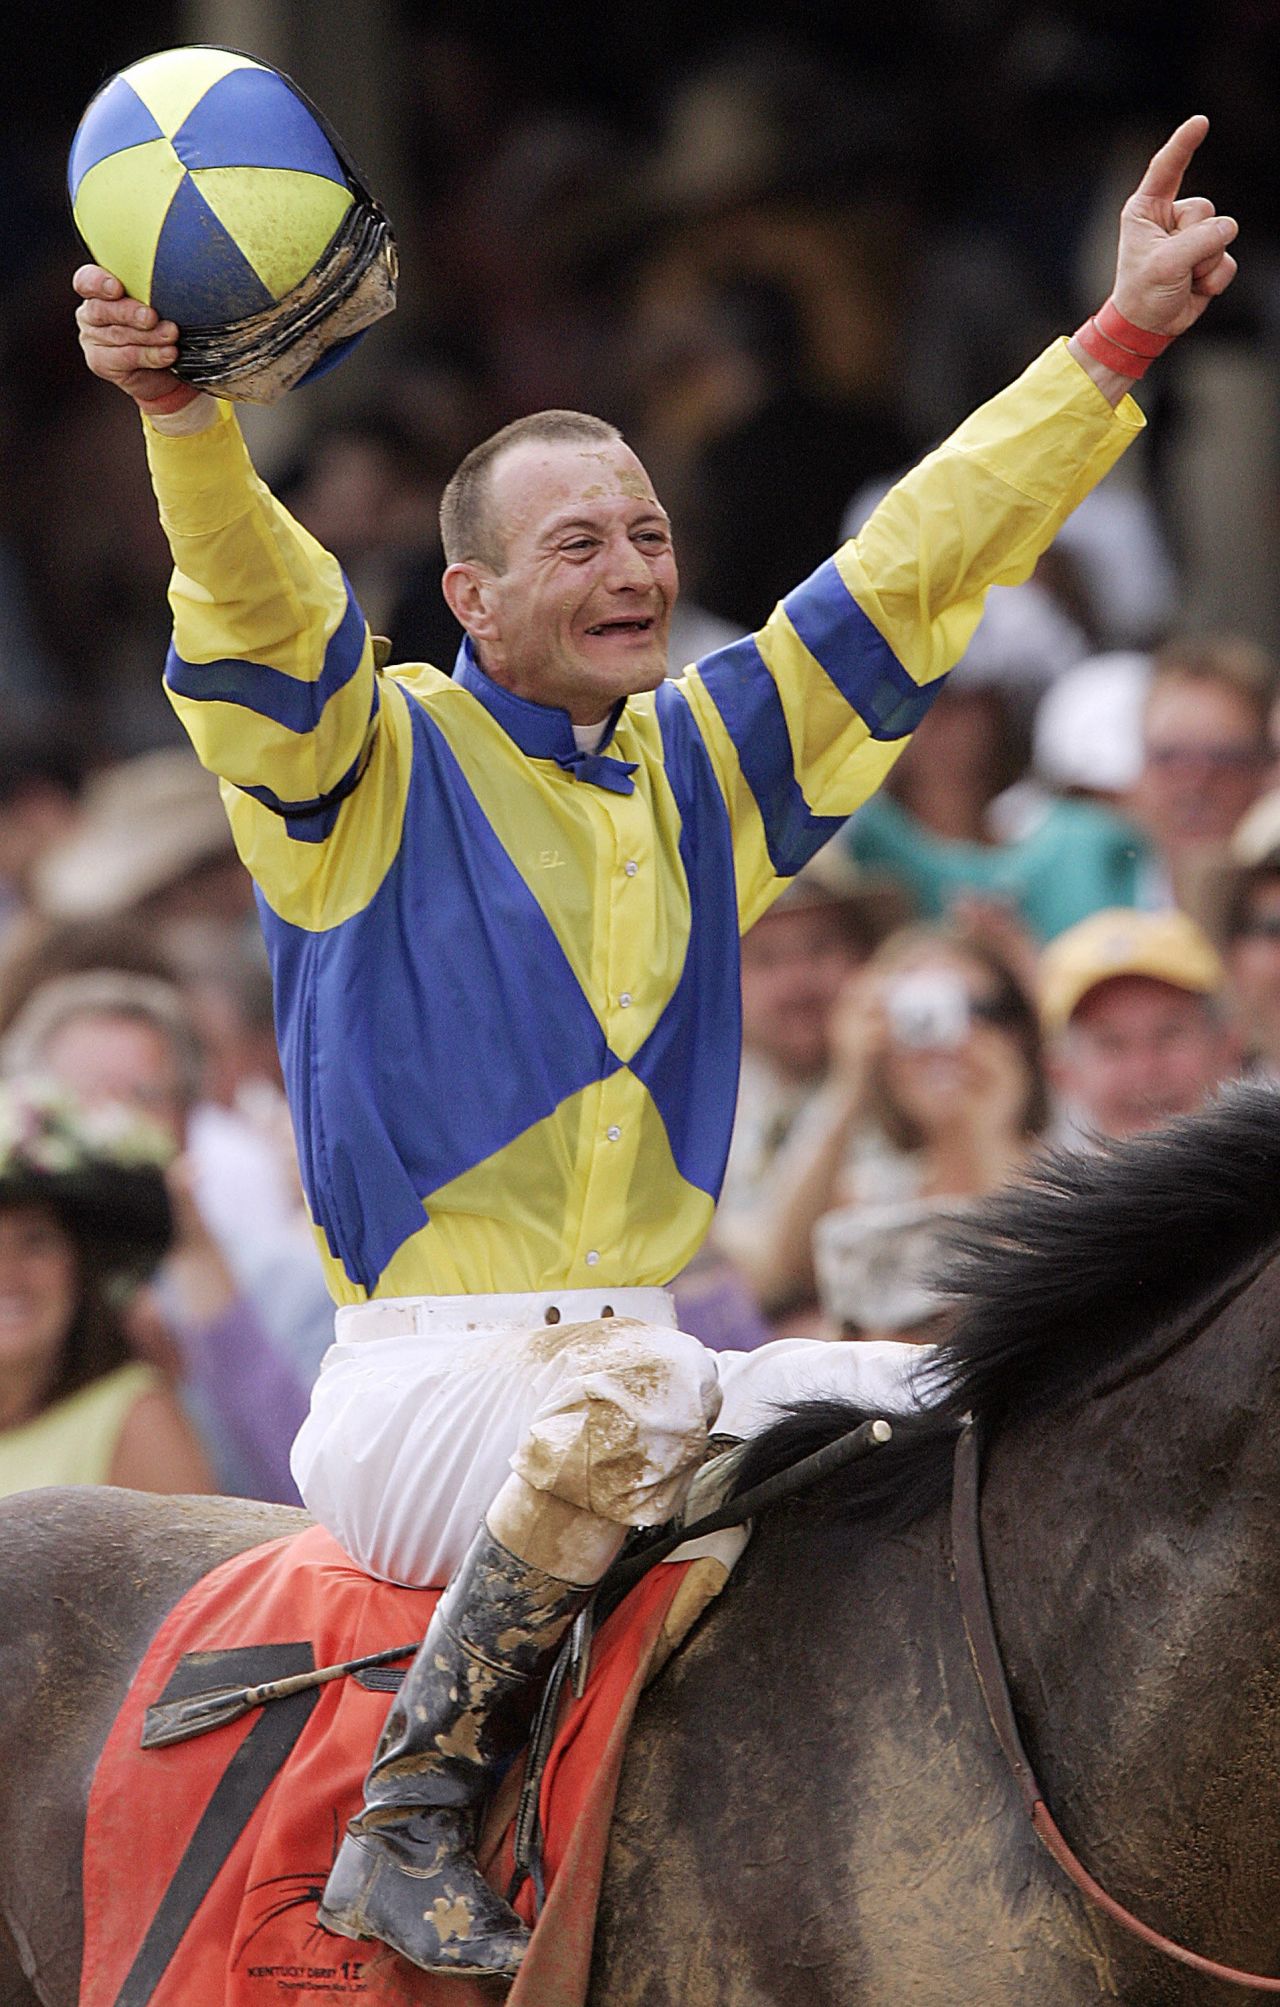 Borel celebrates after winning his first Kentucky Derby atop Street Sense in 2007. He was hugged by President George W. Bush at the White House after that victory.